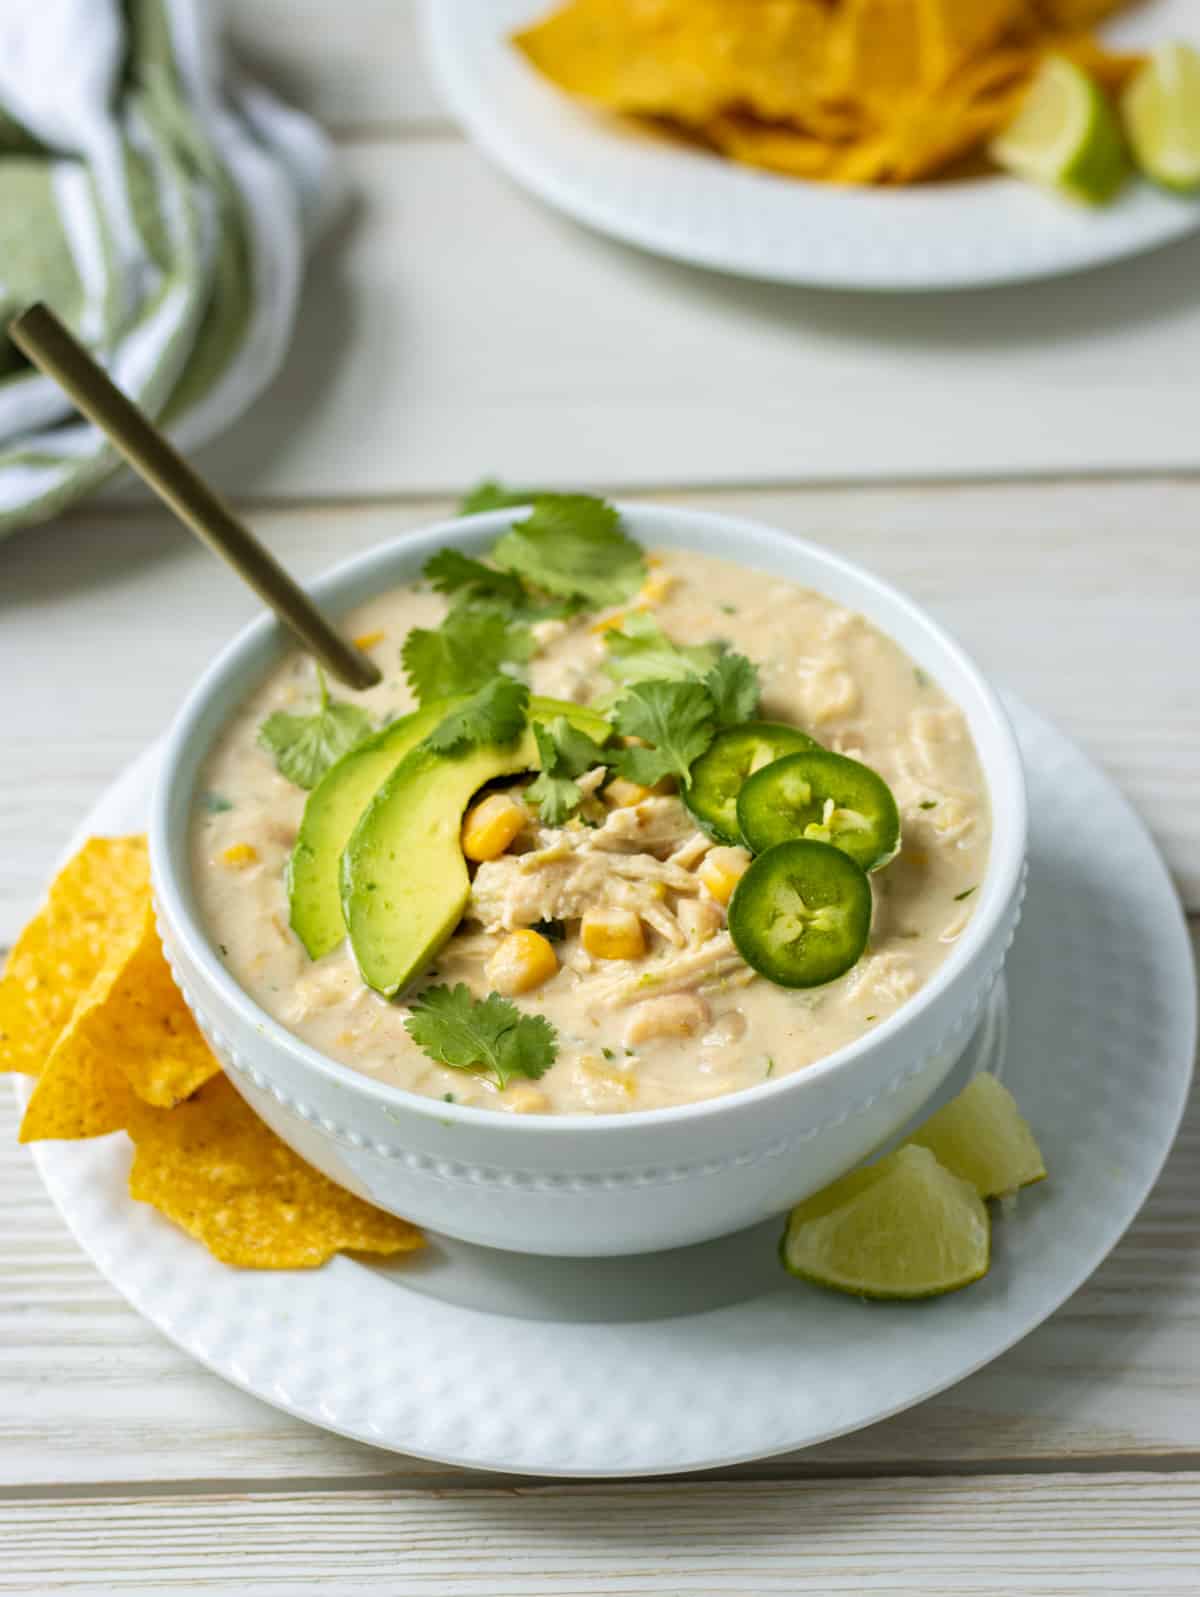 Bowl of white chicken chili topped with sliced avocado, jalapeno, and cilantro on a plate with tortilla chips and lime wedges.